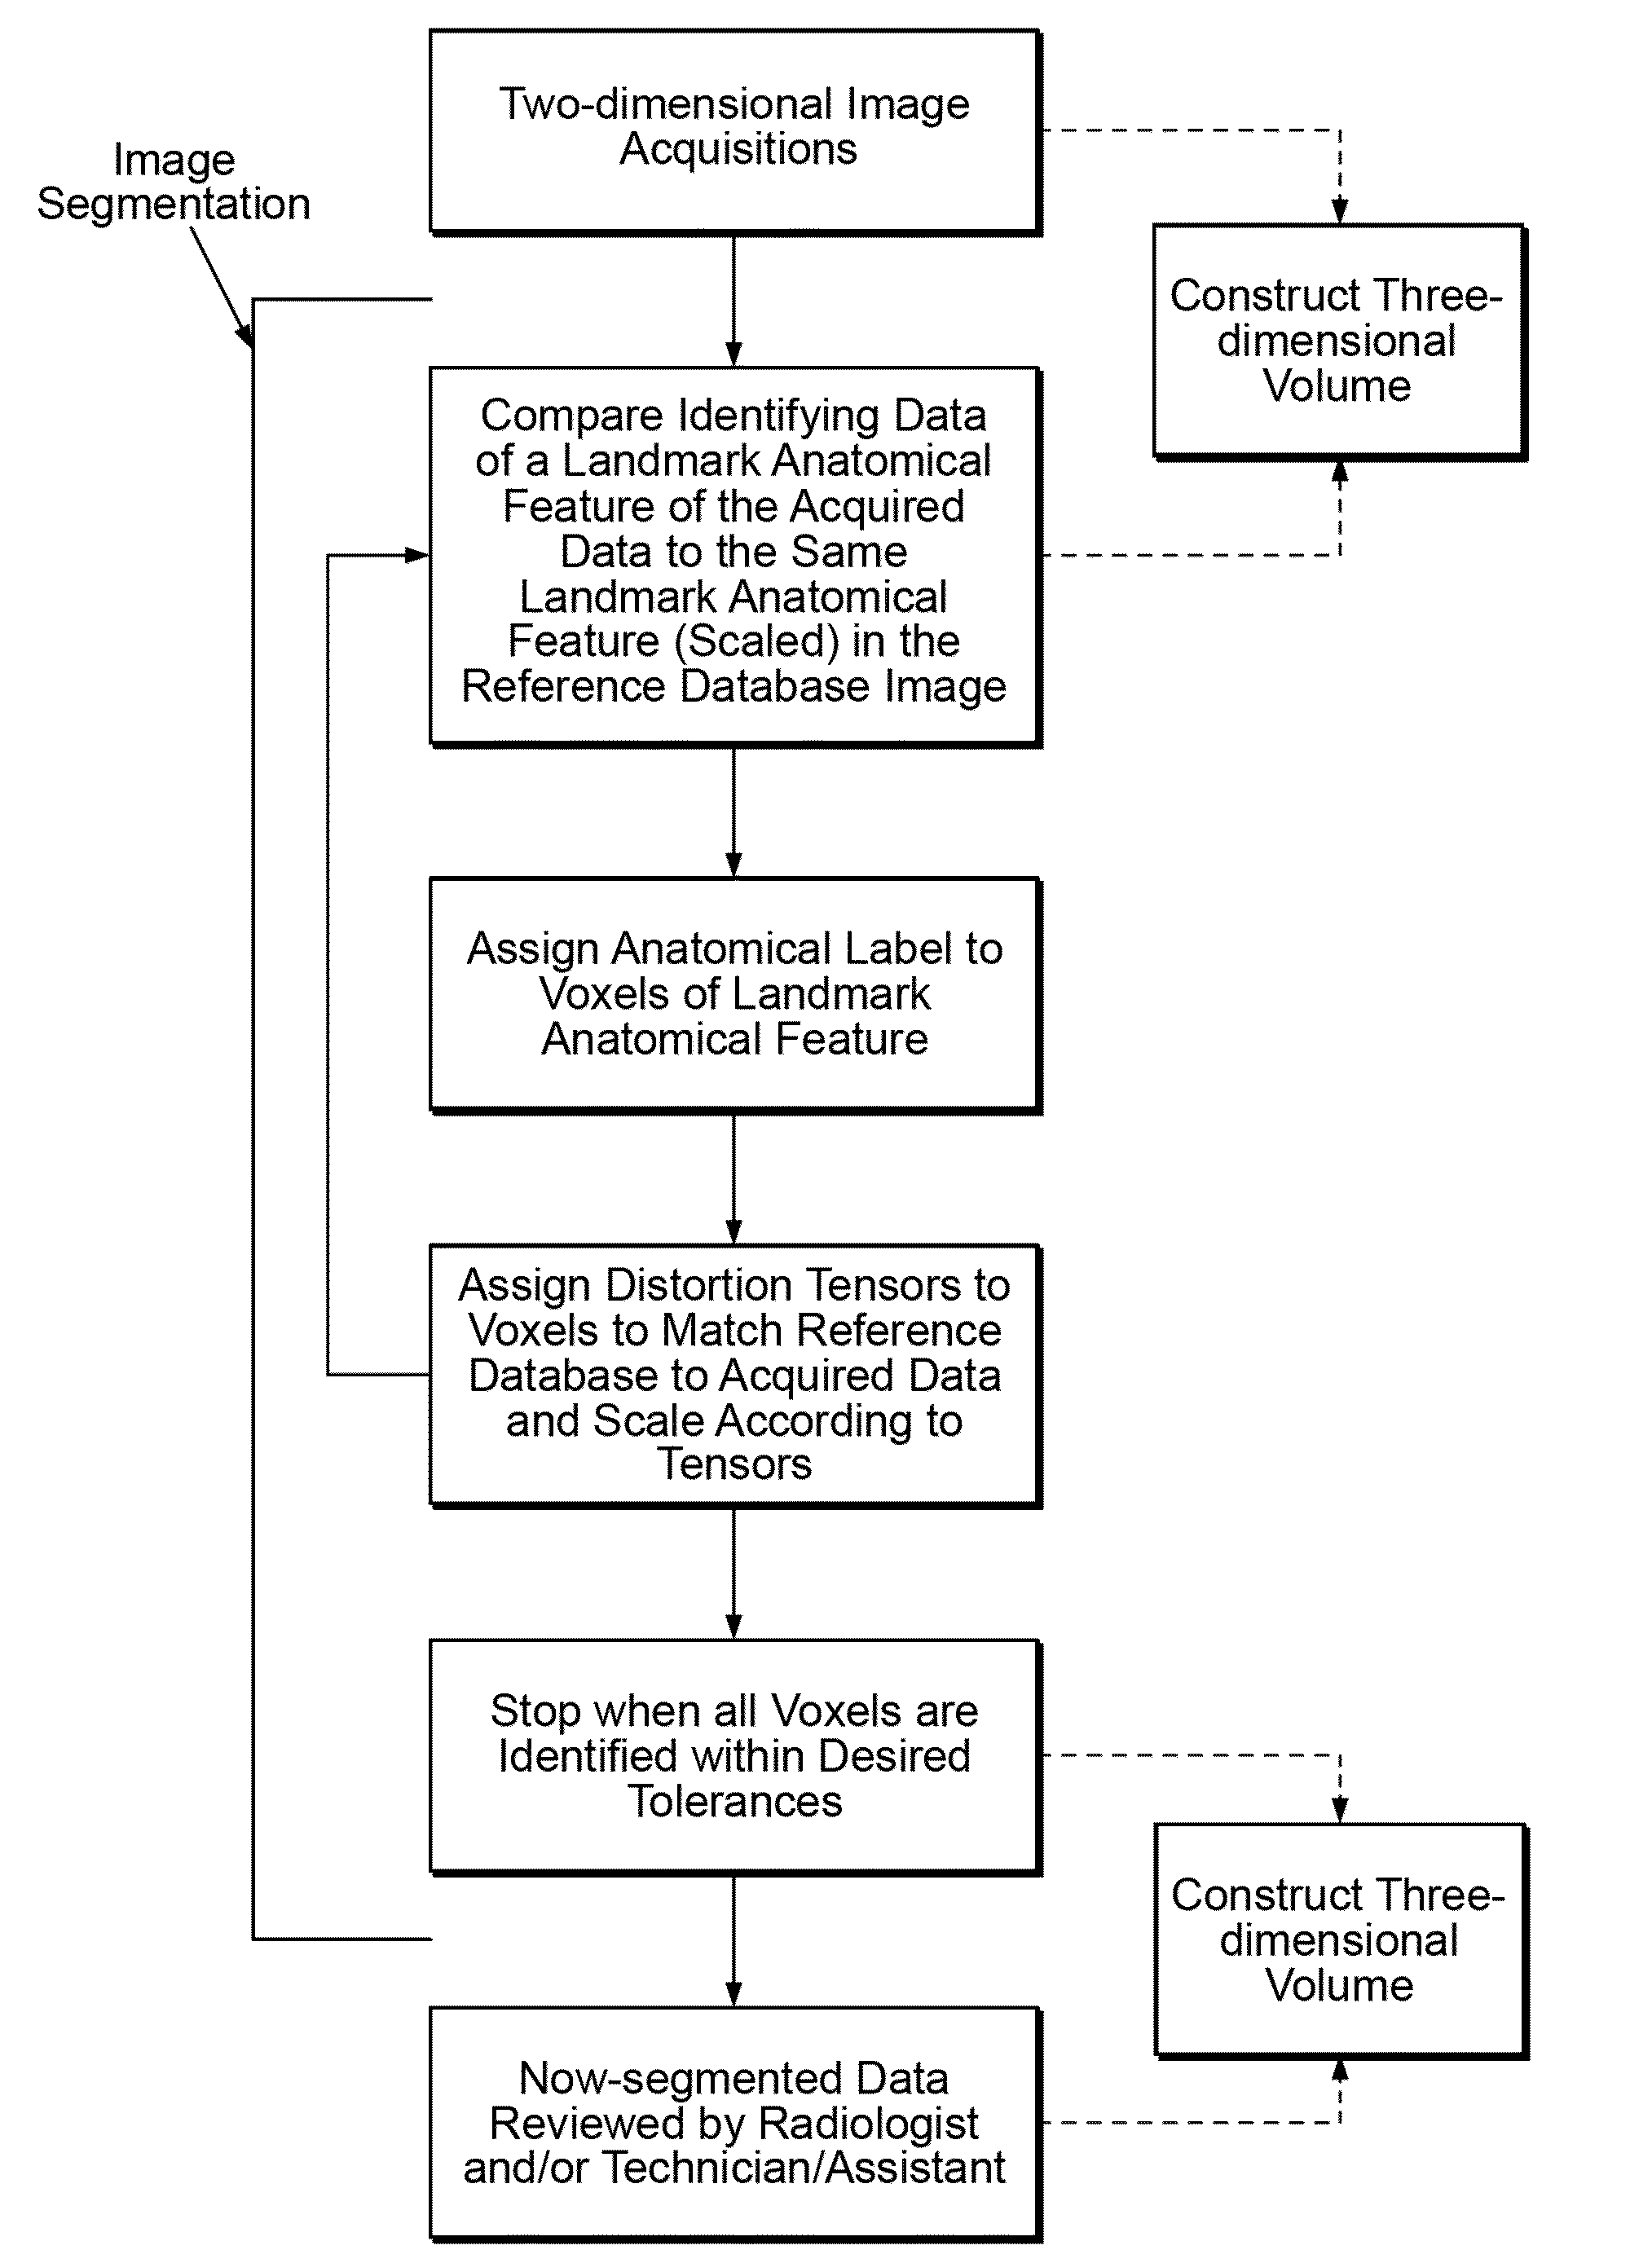 Systems and methods for efficient imaging